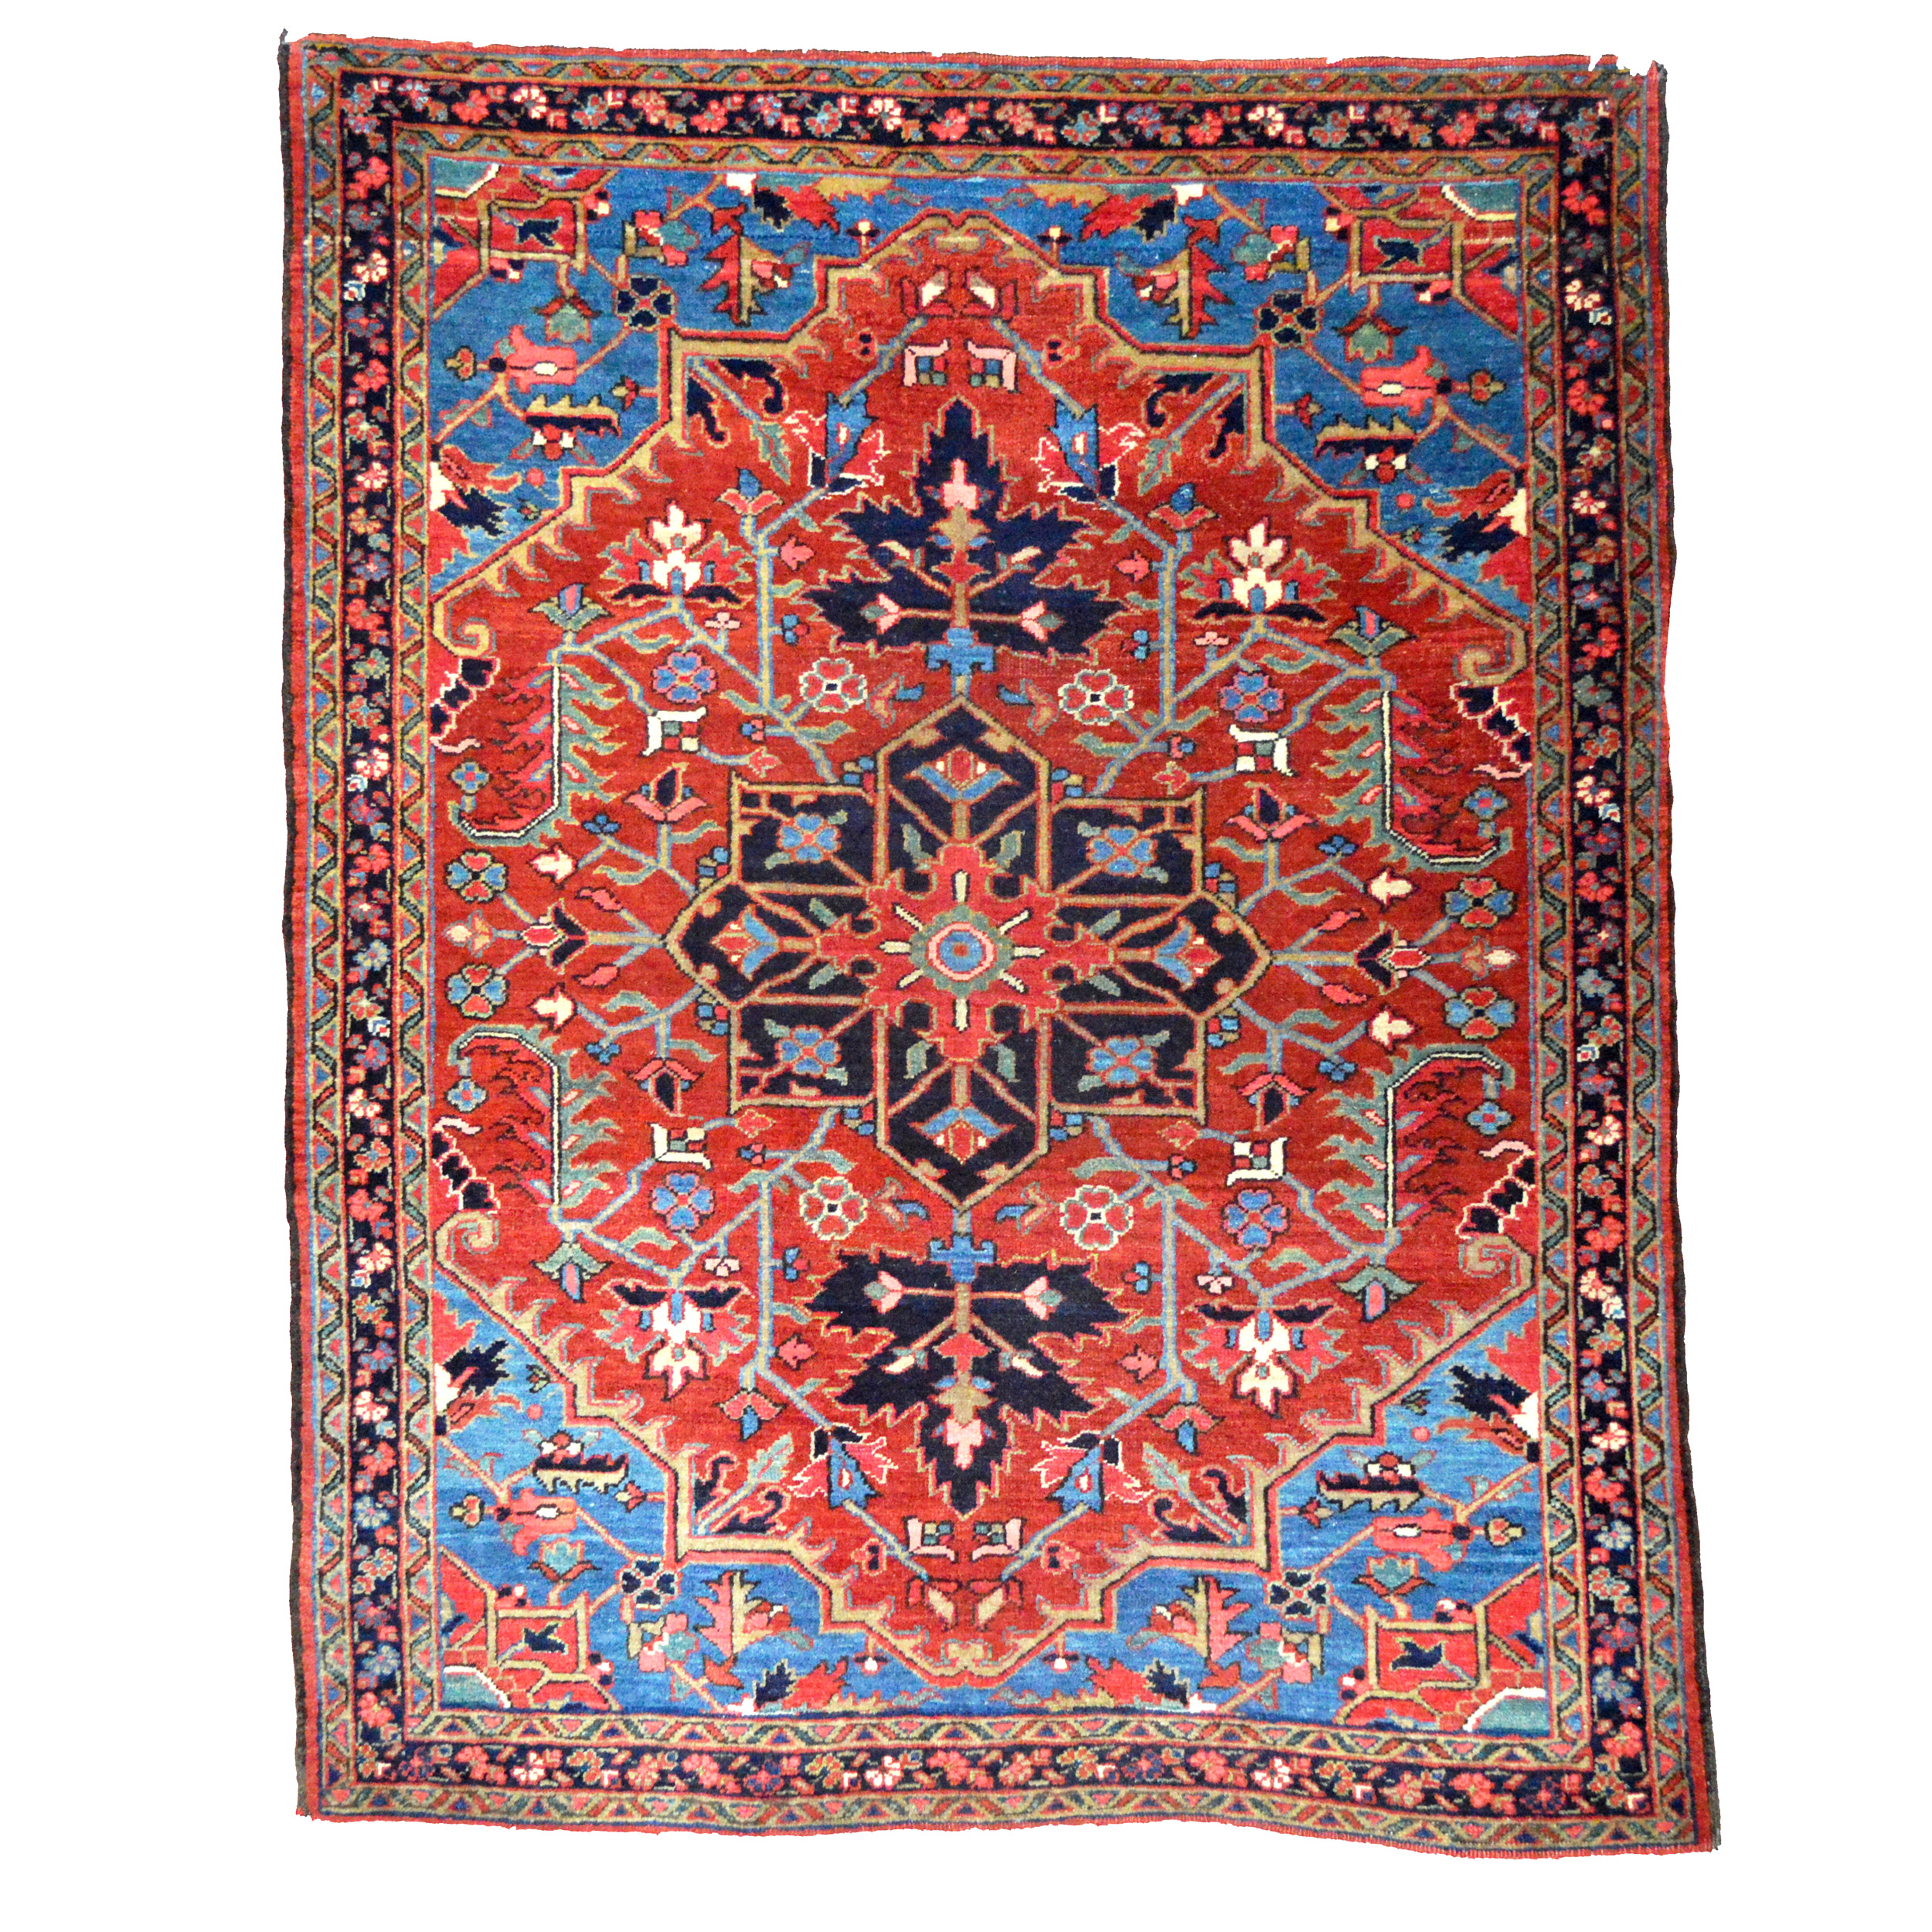 a small antique Persian Heriz rug with a navy blue medallion on a deep salmon color field that is framed by denim blue spandrels and a navy border - Douglas Stock Gallery, antique Oriental rugs, South Natick, Wellesley, Newton, Brookline, Boston,MA area